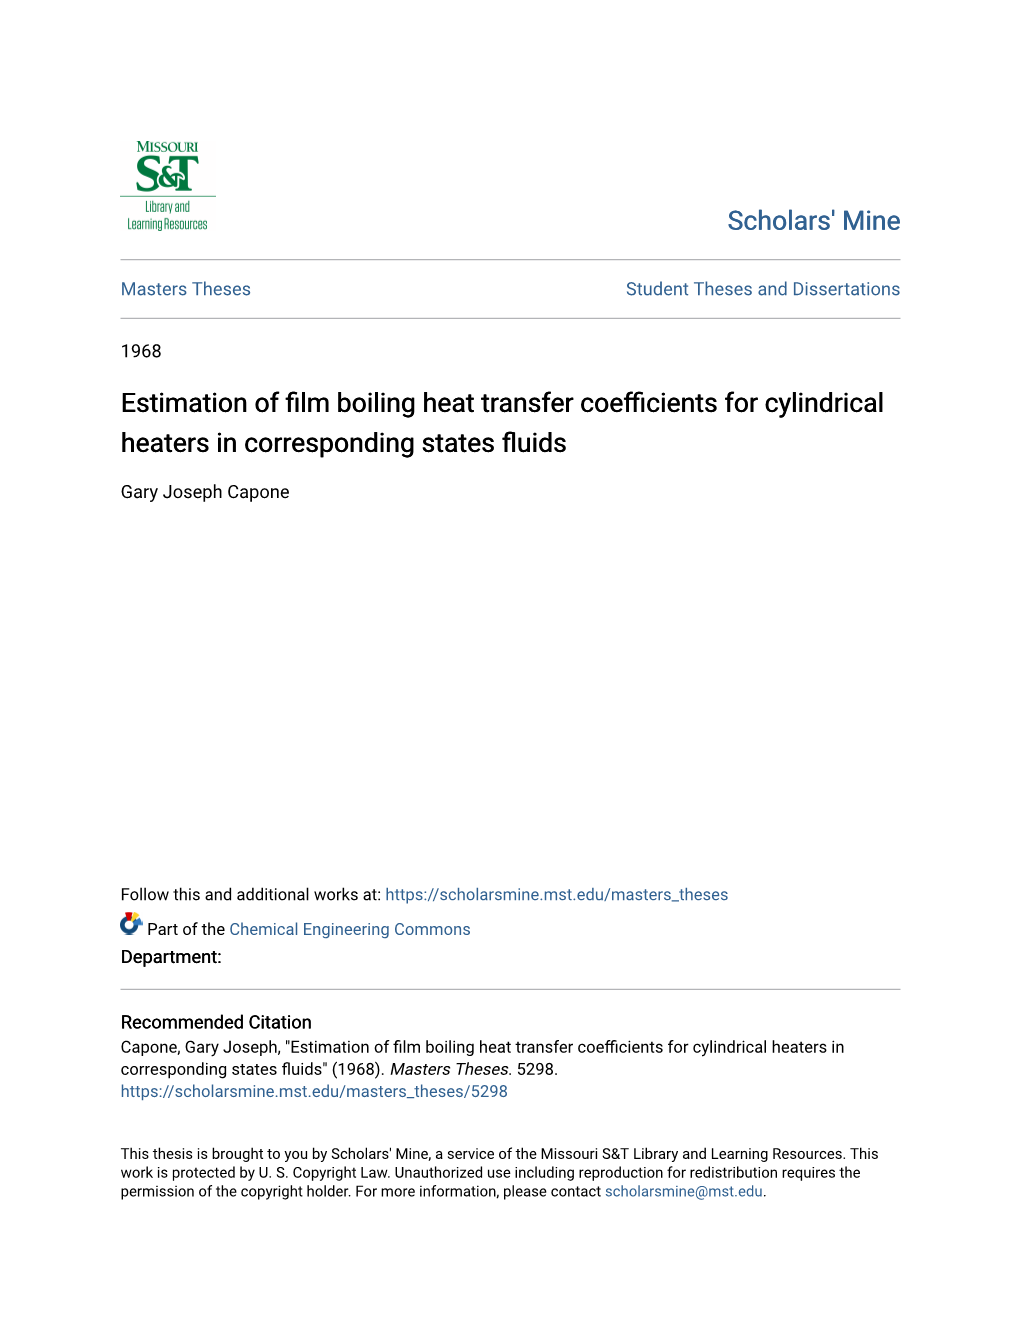 Estimation of Film Boiling Heat Transfer Coefficients for Cylindrical Heaters in Corresponding States Fluids